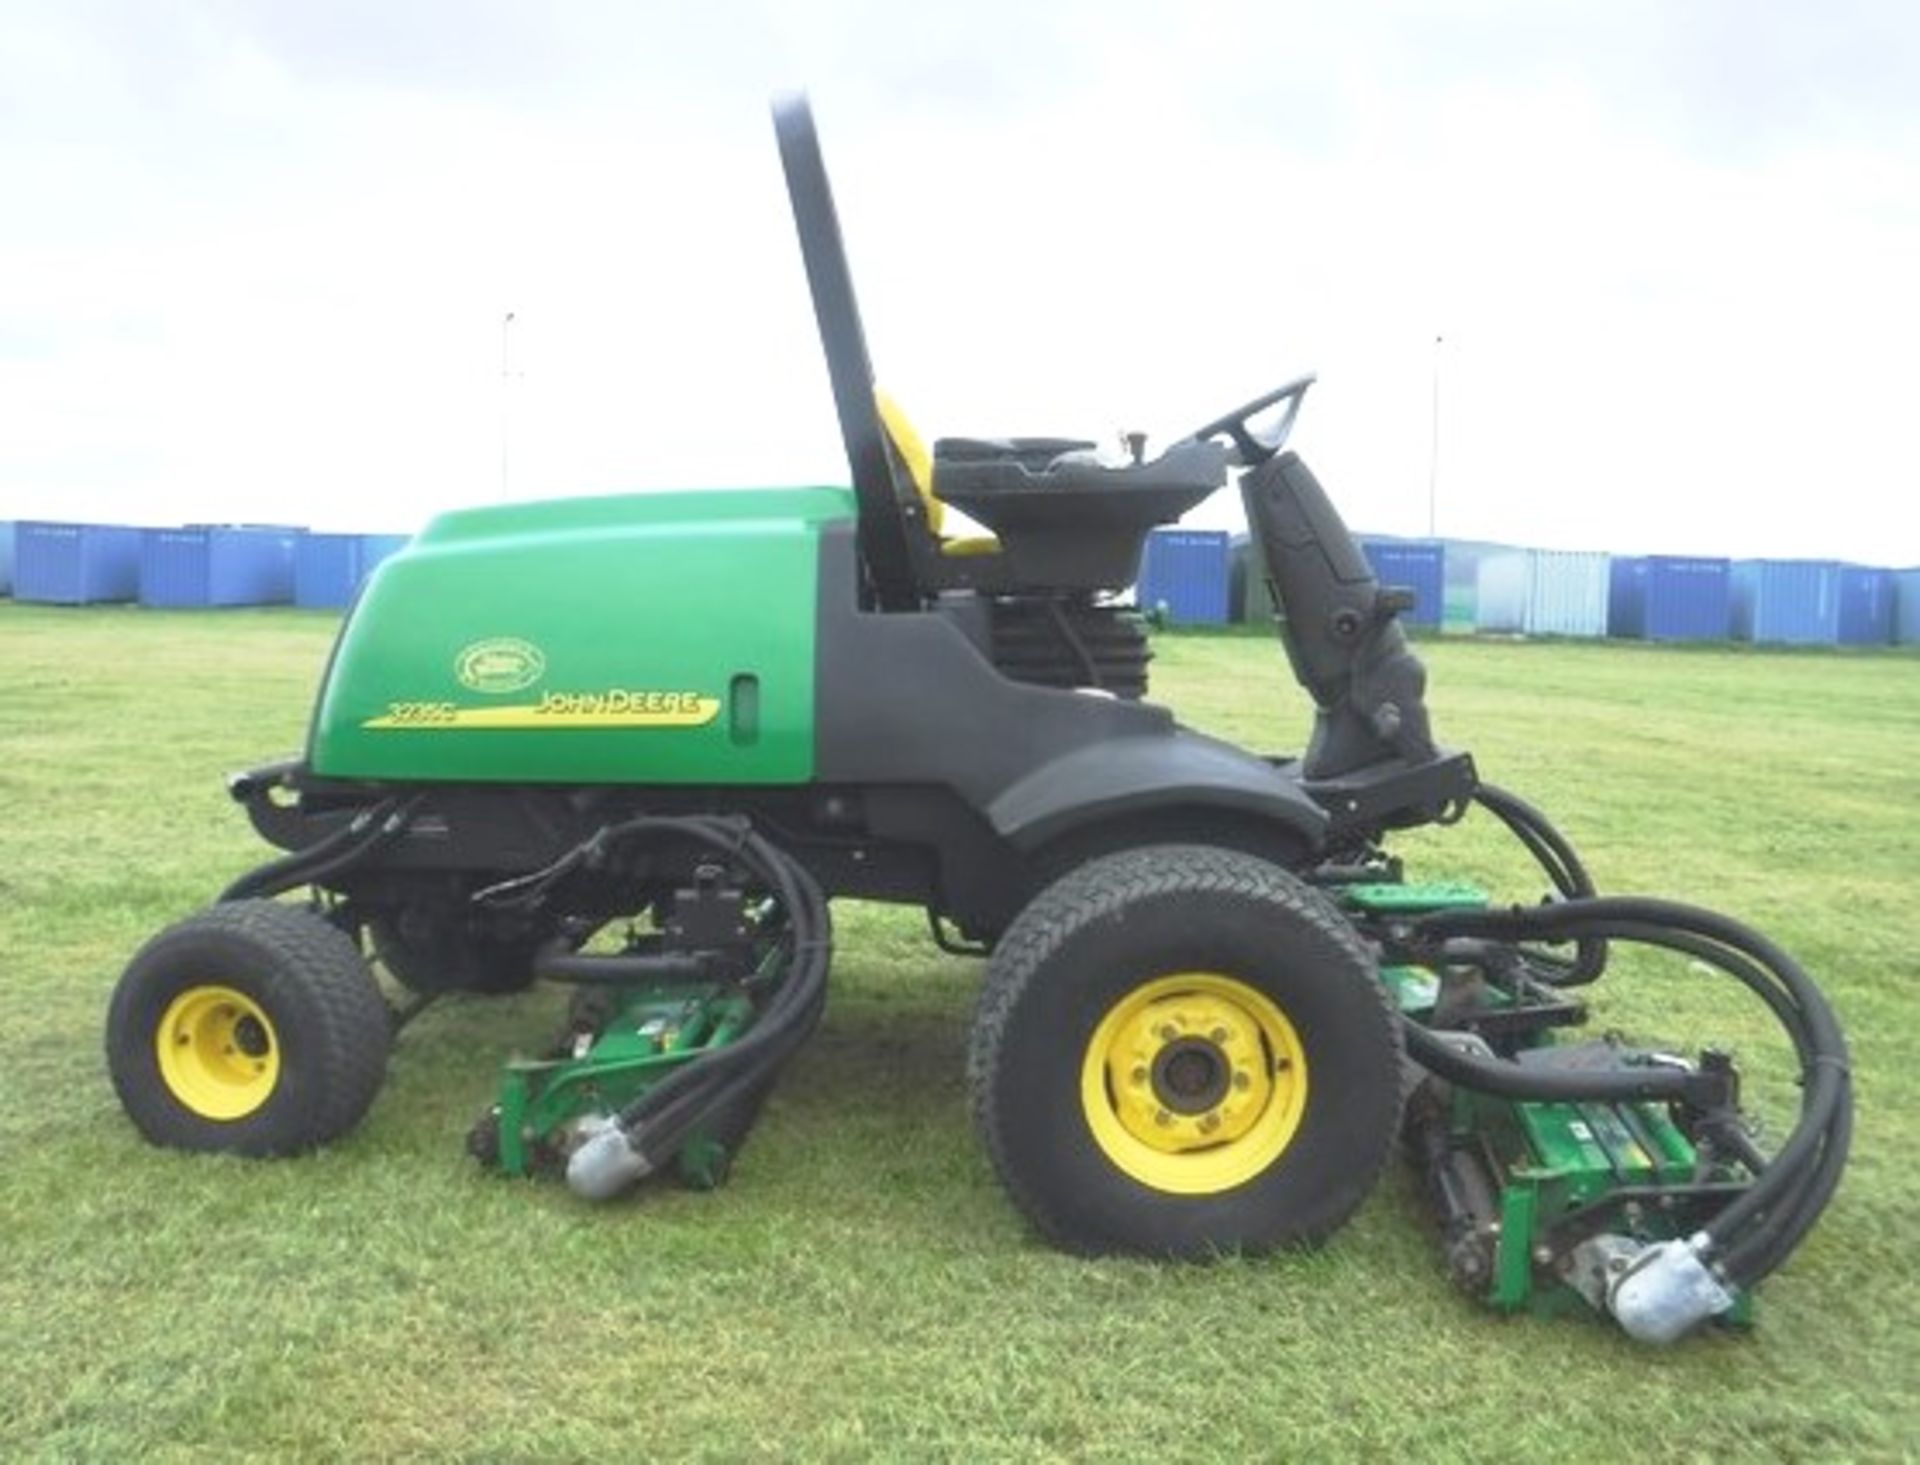 JOHN DEERE 3233C 3 gang out front ride on mower s/n TC32335C040226. 2601hrs (not verified). - Image 6 of 11